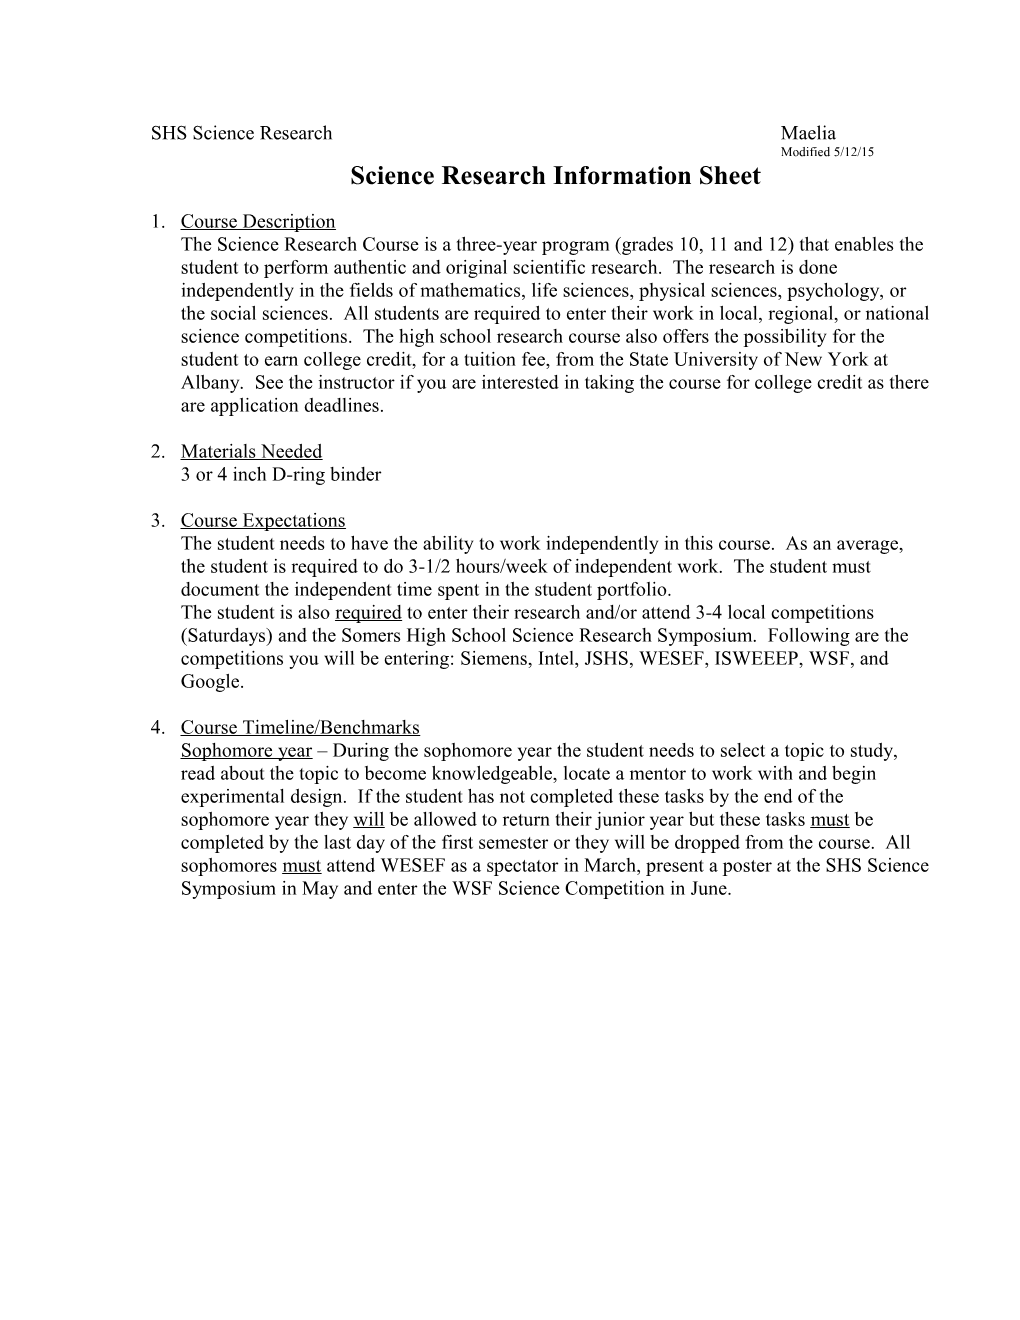 Science Research Information Sheet